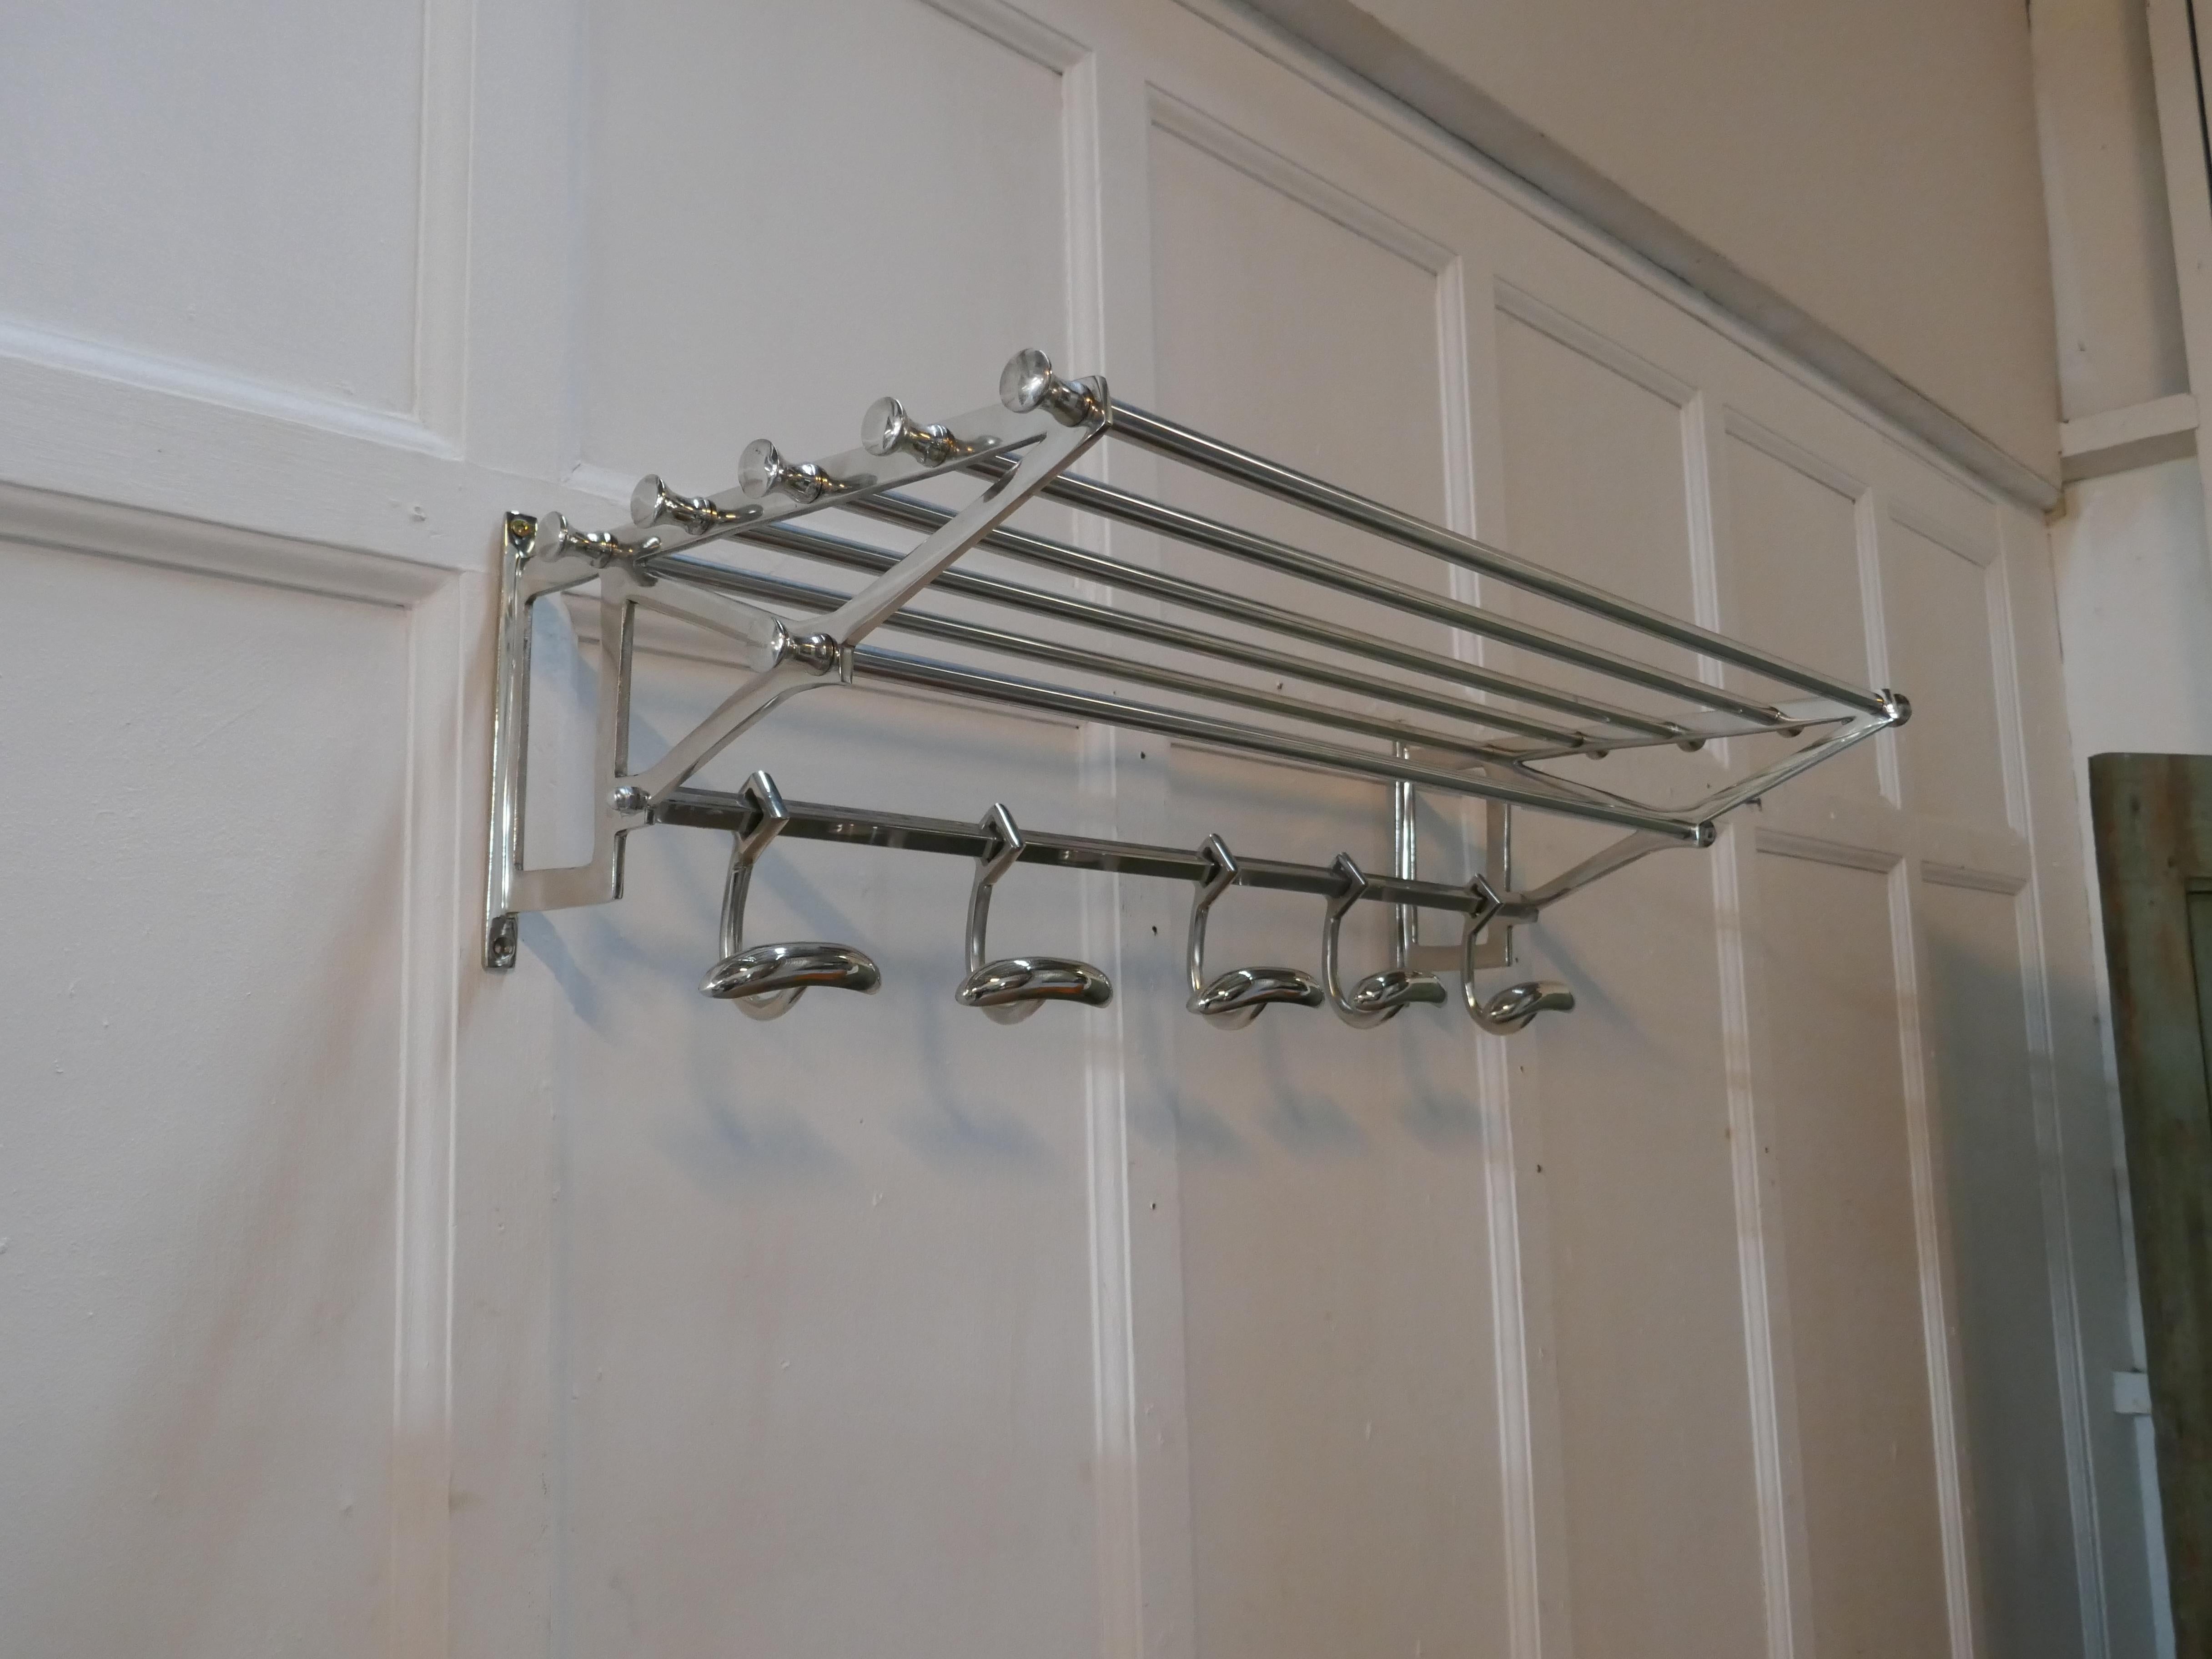 French Art Deco style hat and coat rack, Pullman railway train style

 This Art Deco style hat and coat rack has five sliding hooks and an upper railed shelf 
Racks just like these were used on French railway trains just like the ones on “the